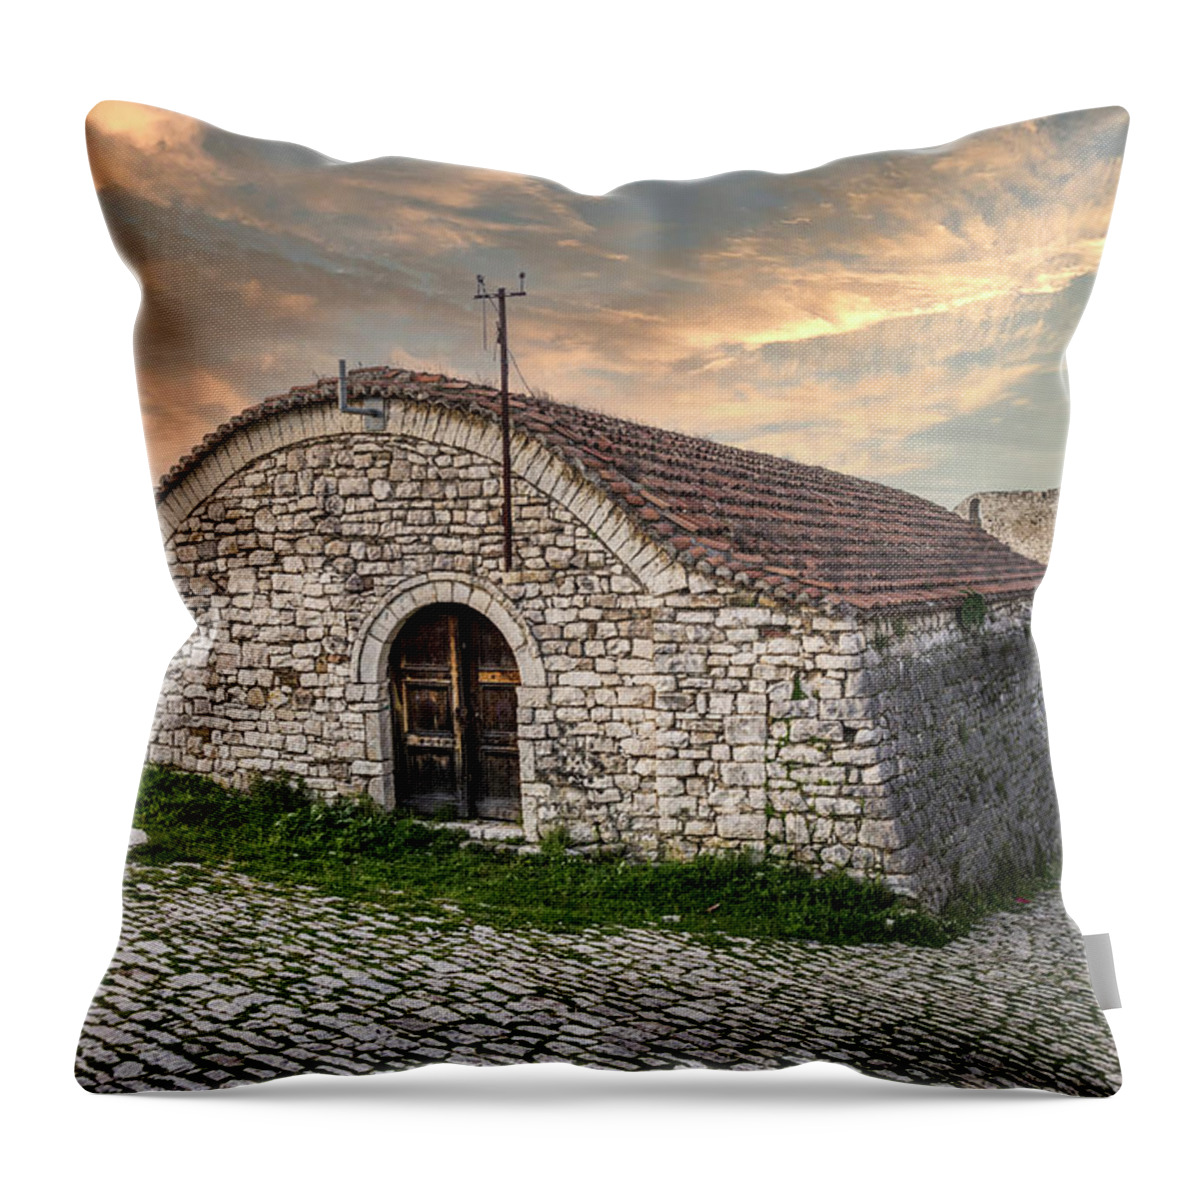 Cloudy Sky Throw Pillow featuring the photograph The Cool Room by Ari Rex